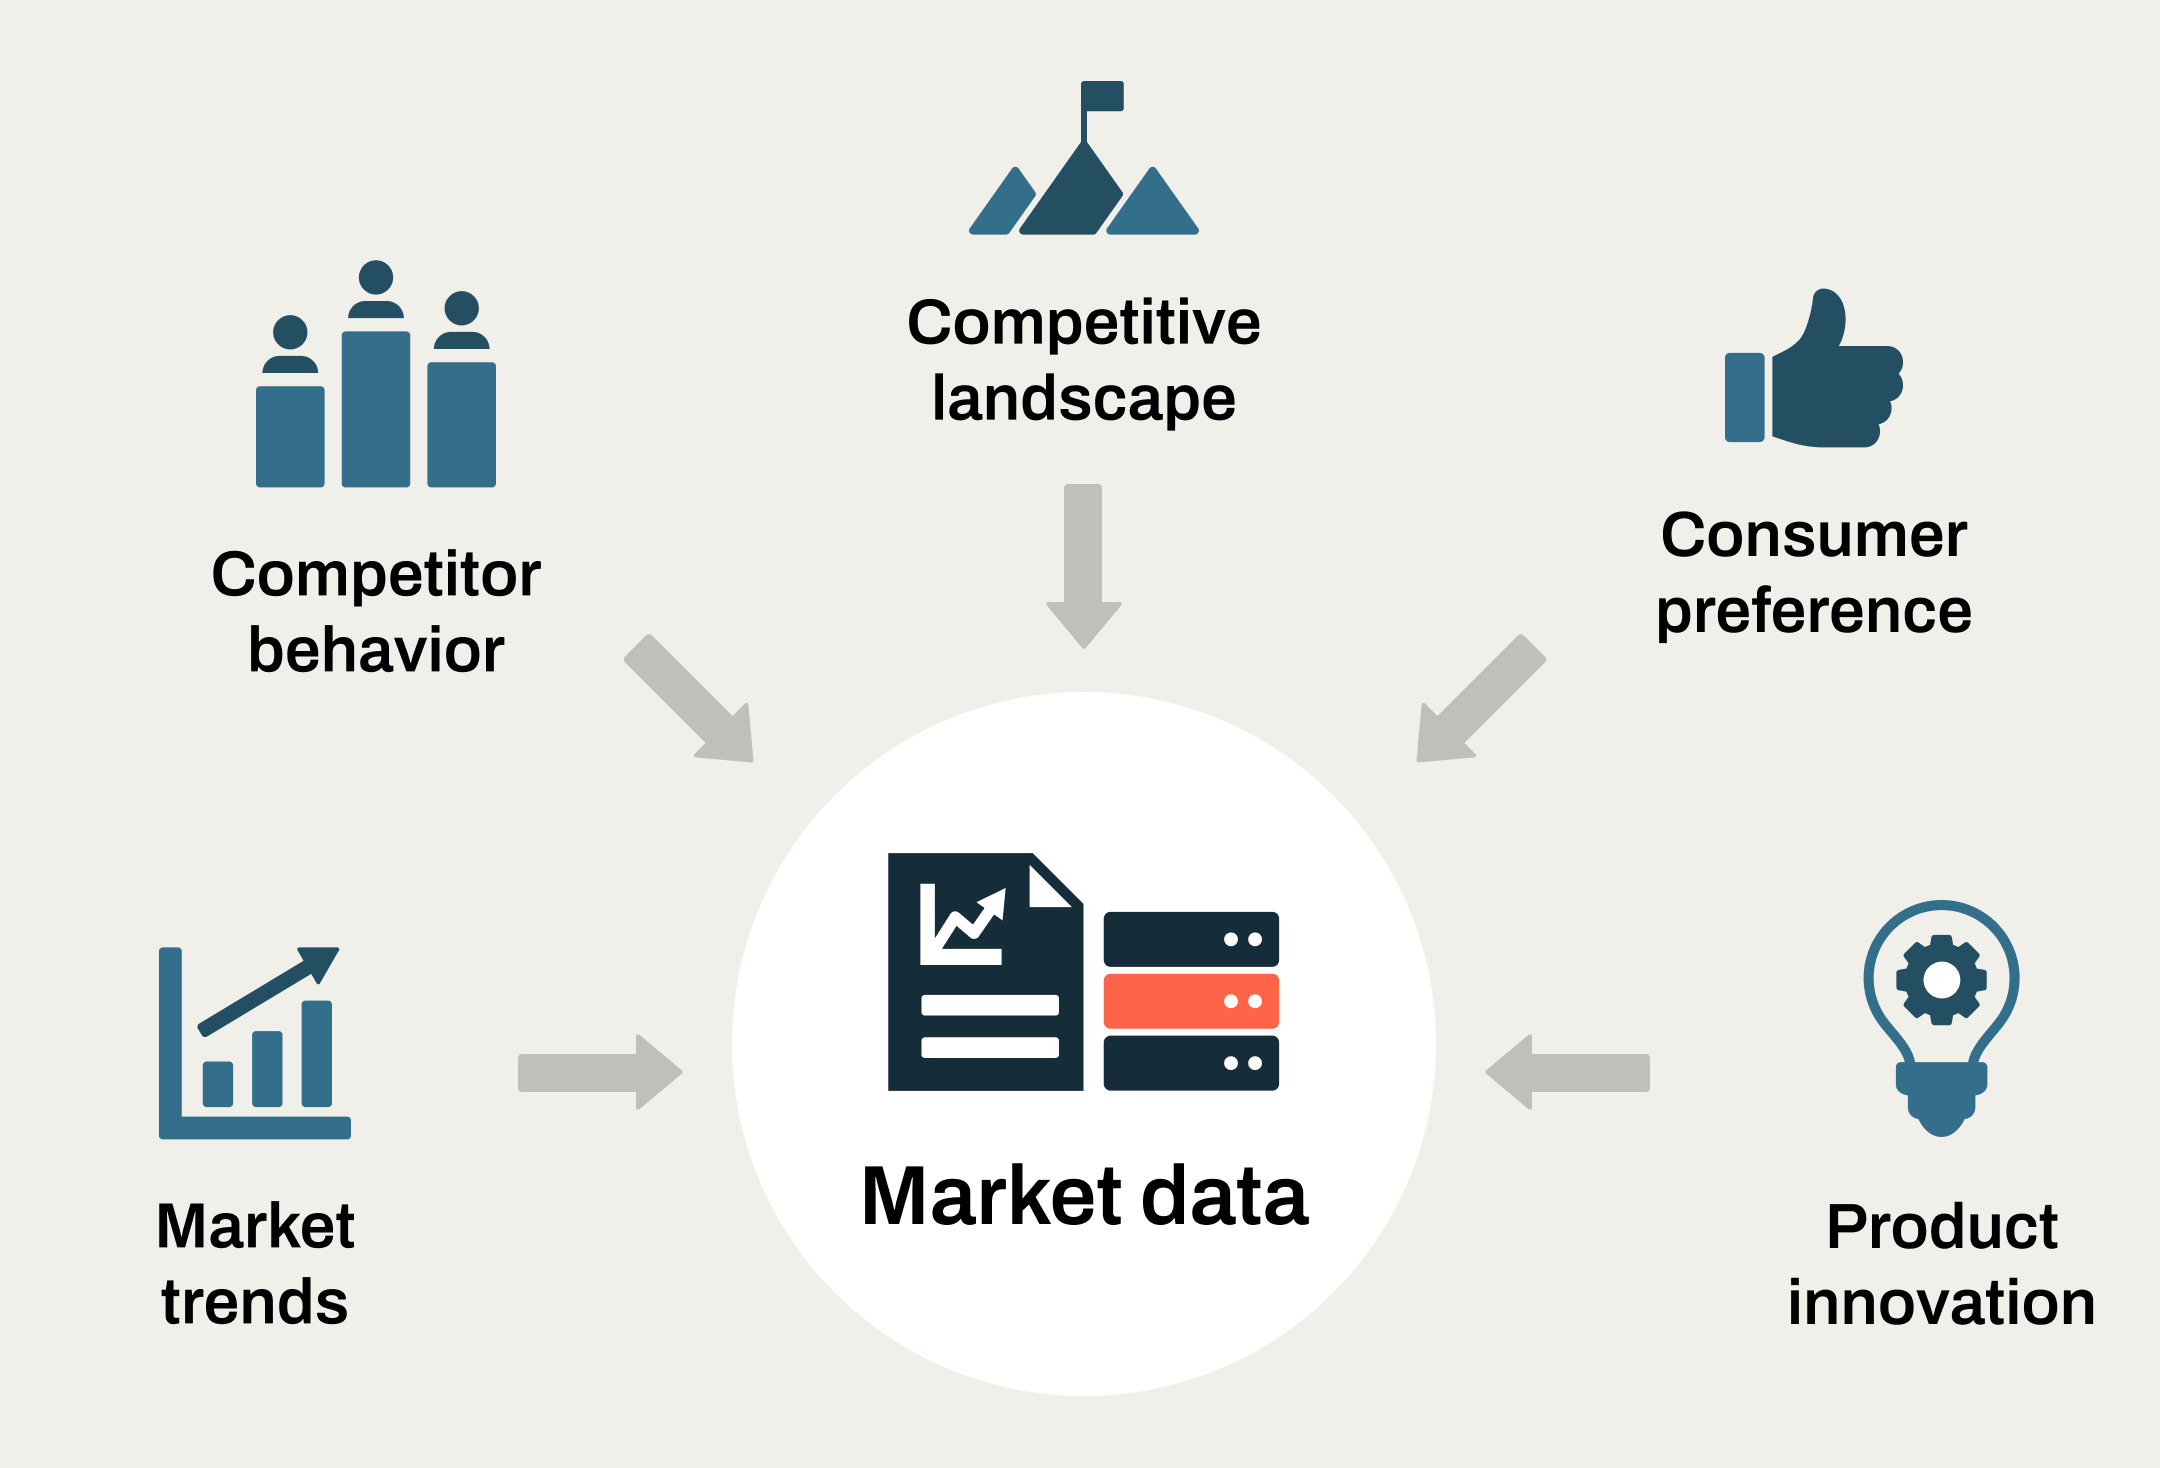 Image of Market Trends, Competitive Behaviors, Competitive Landscape, Customer Preferences, and Product Innovation feeding into Market Data